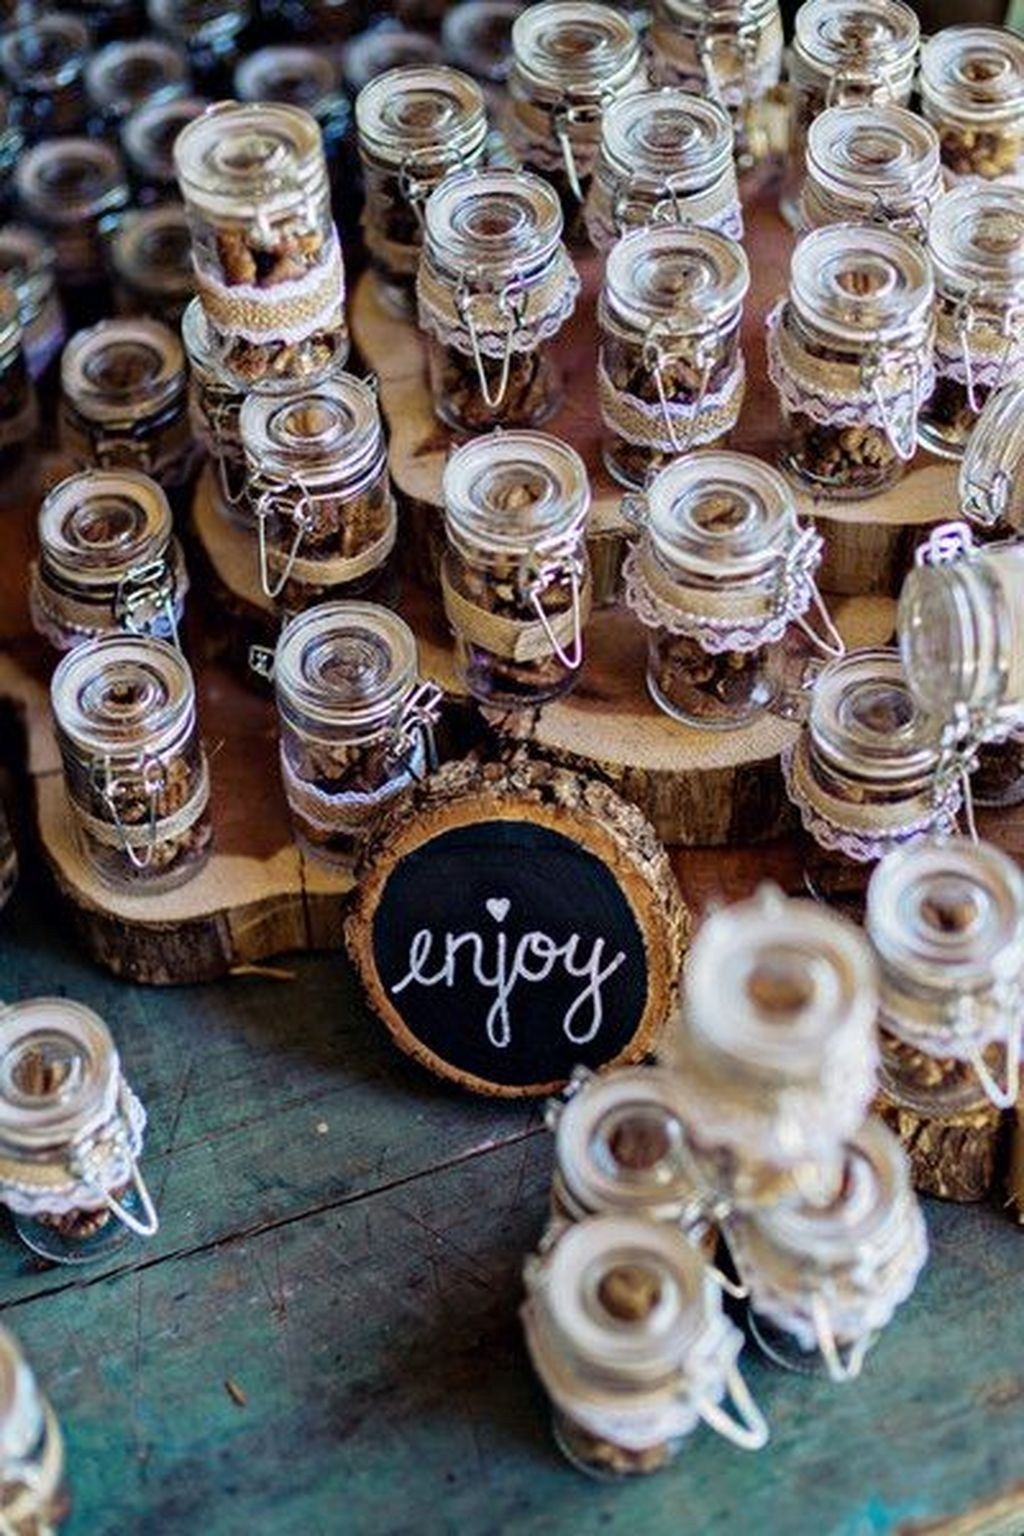 Edible Wedding Favors Your Guests Will Totally Love